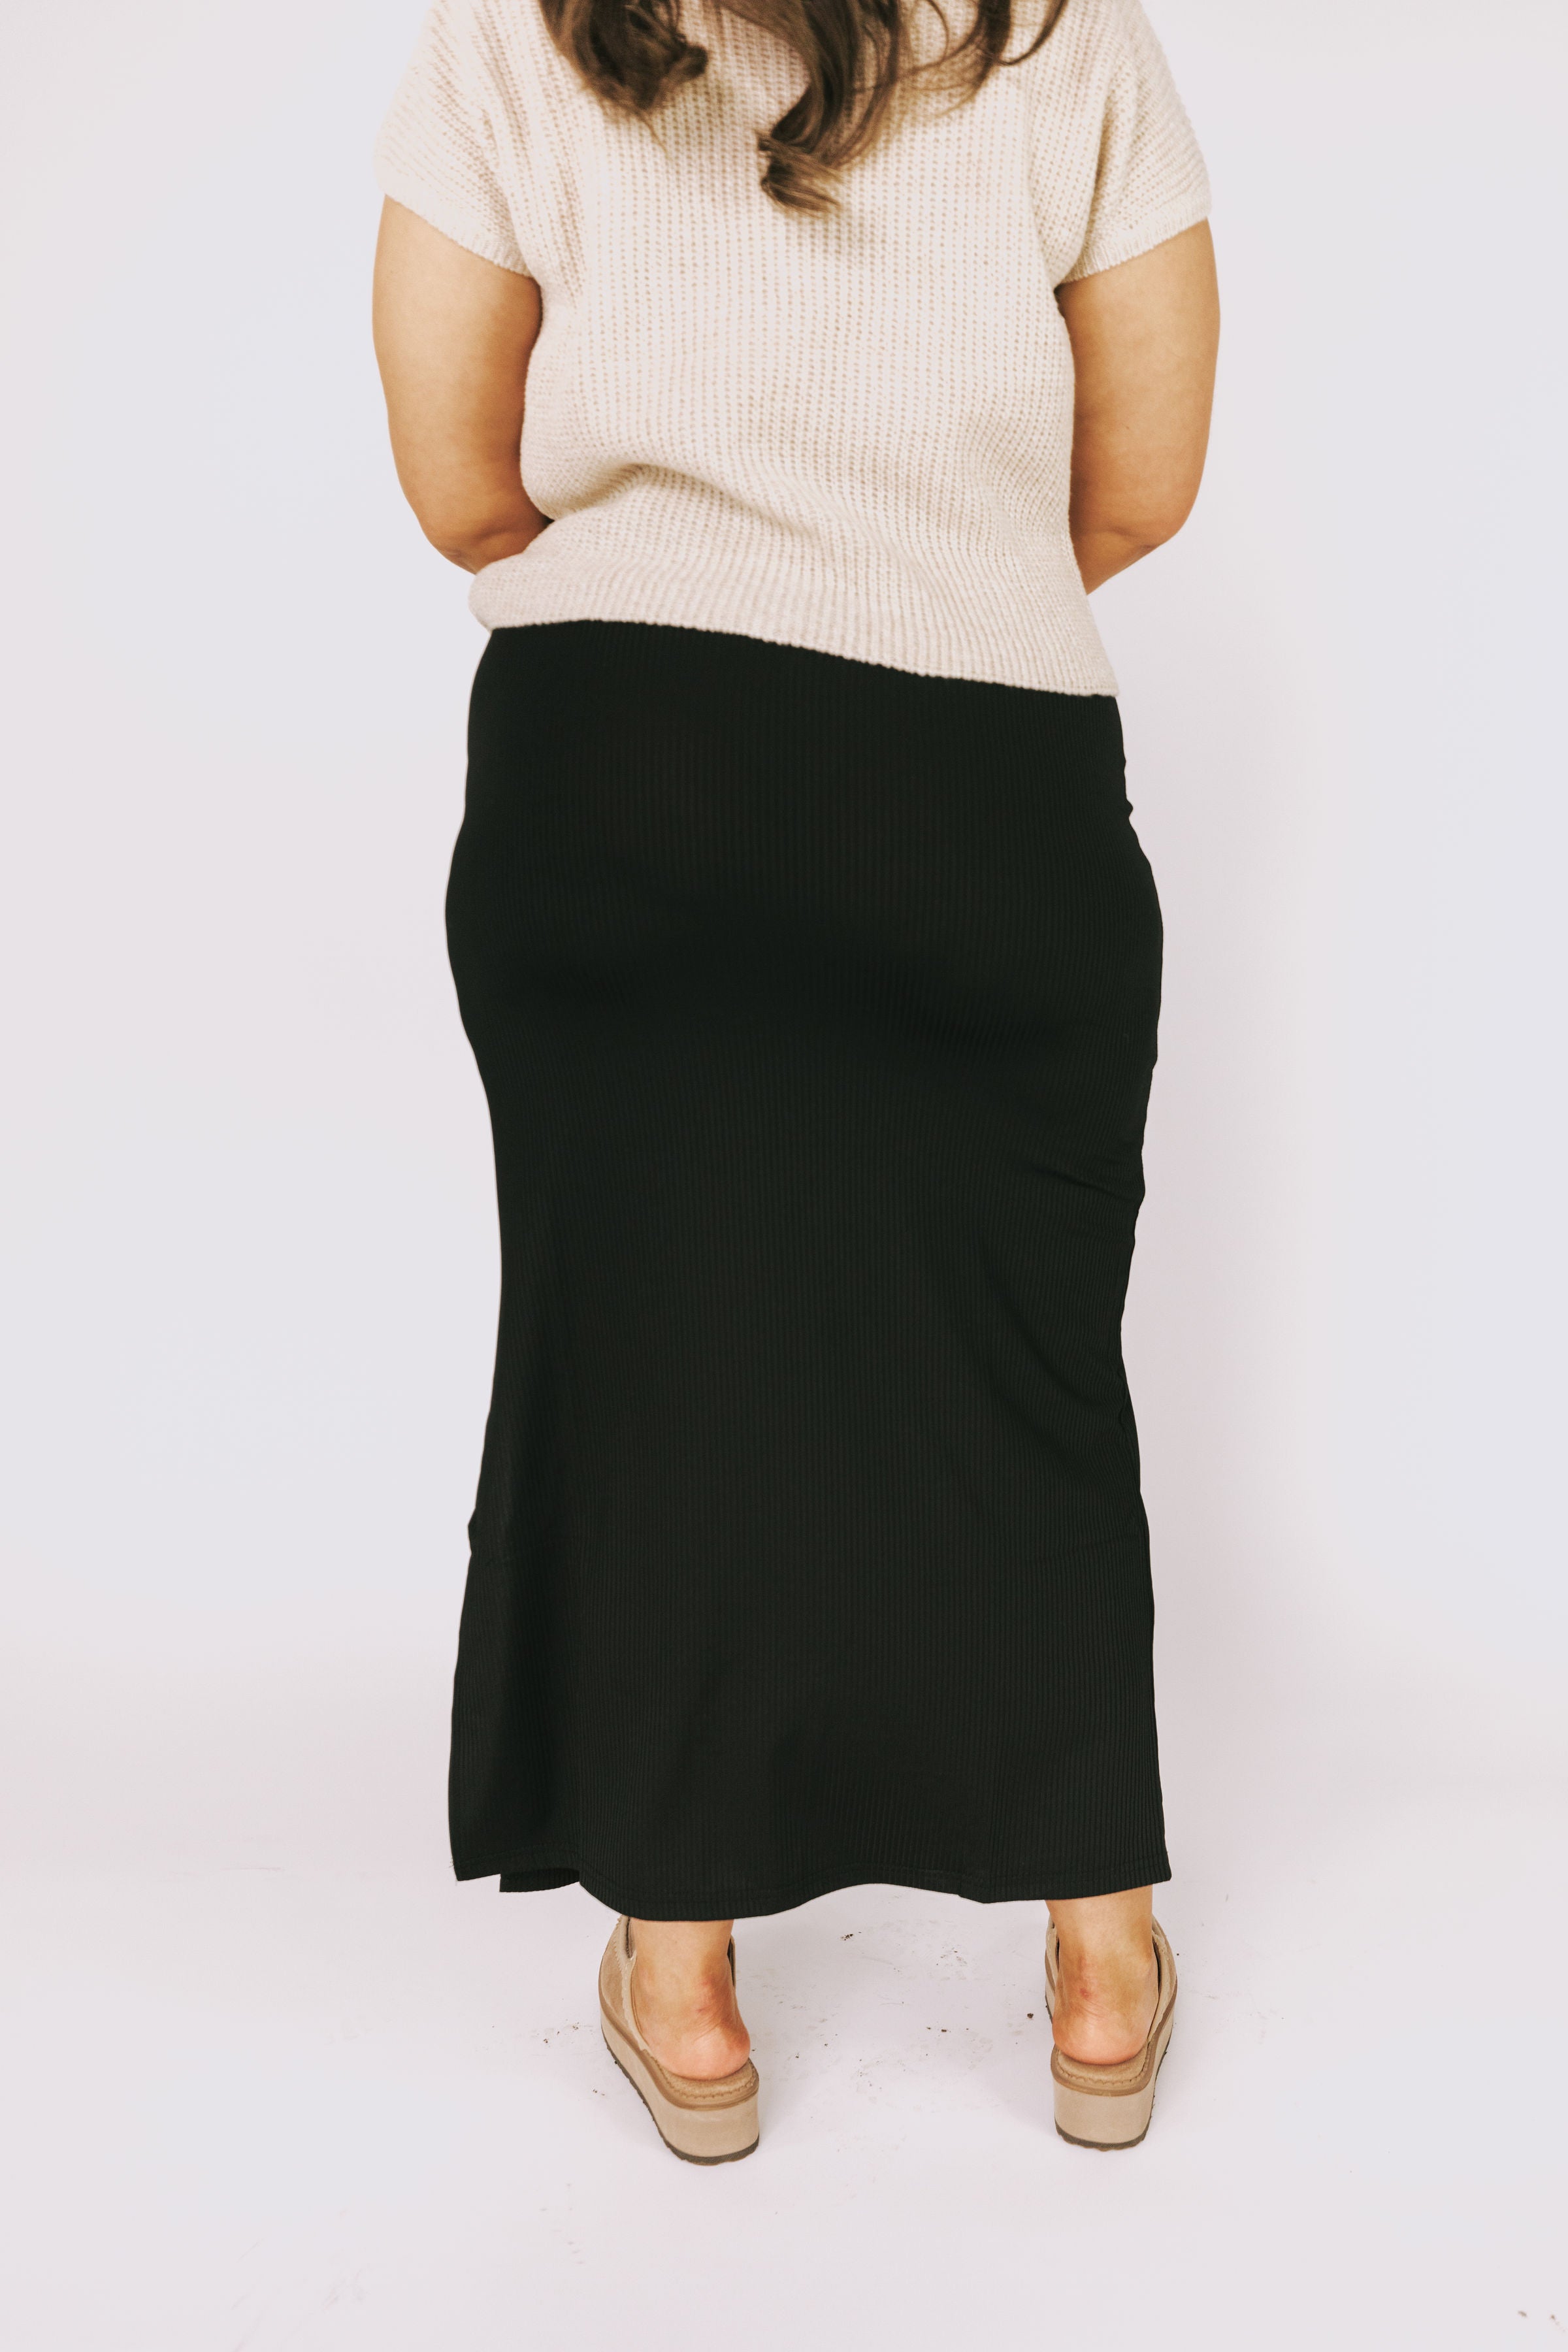 PLUS SIZE - Save The Day Skirt